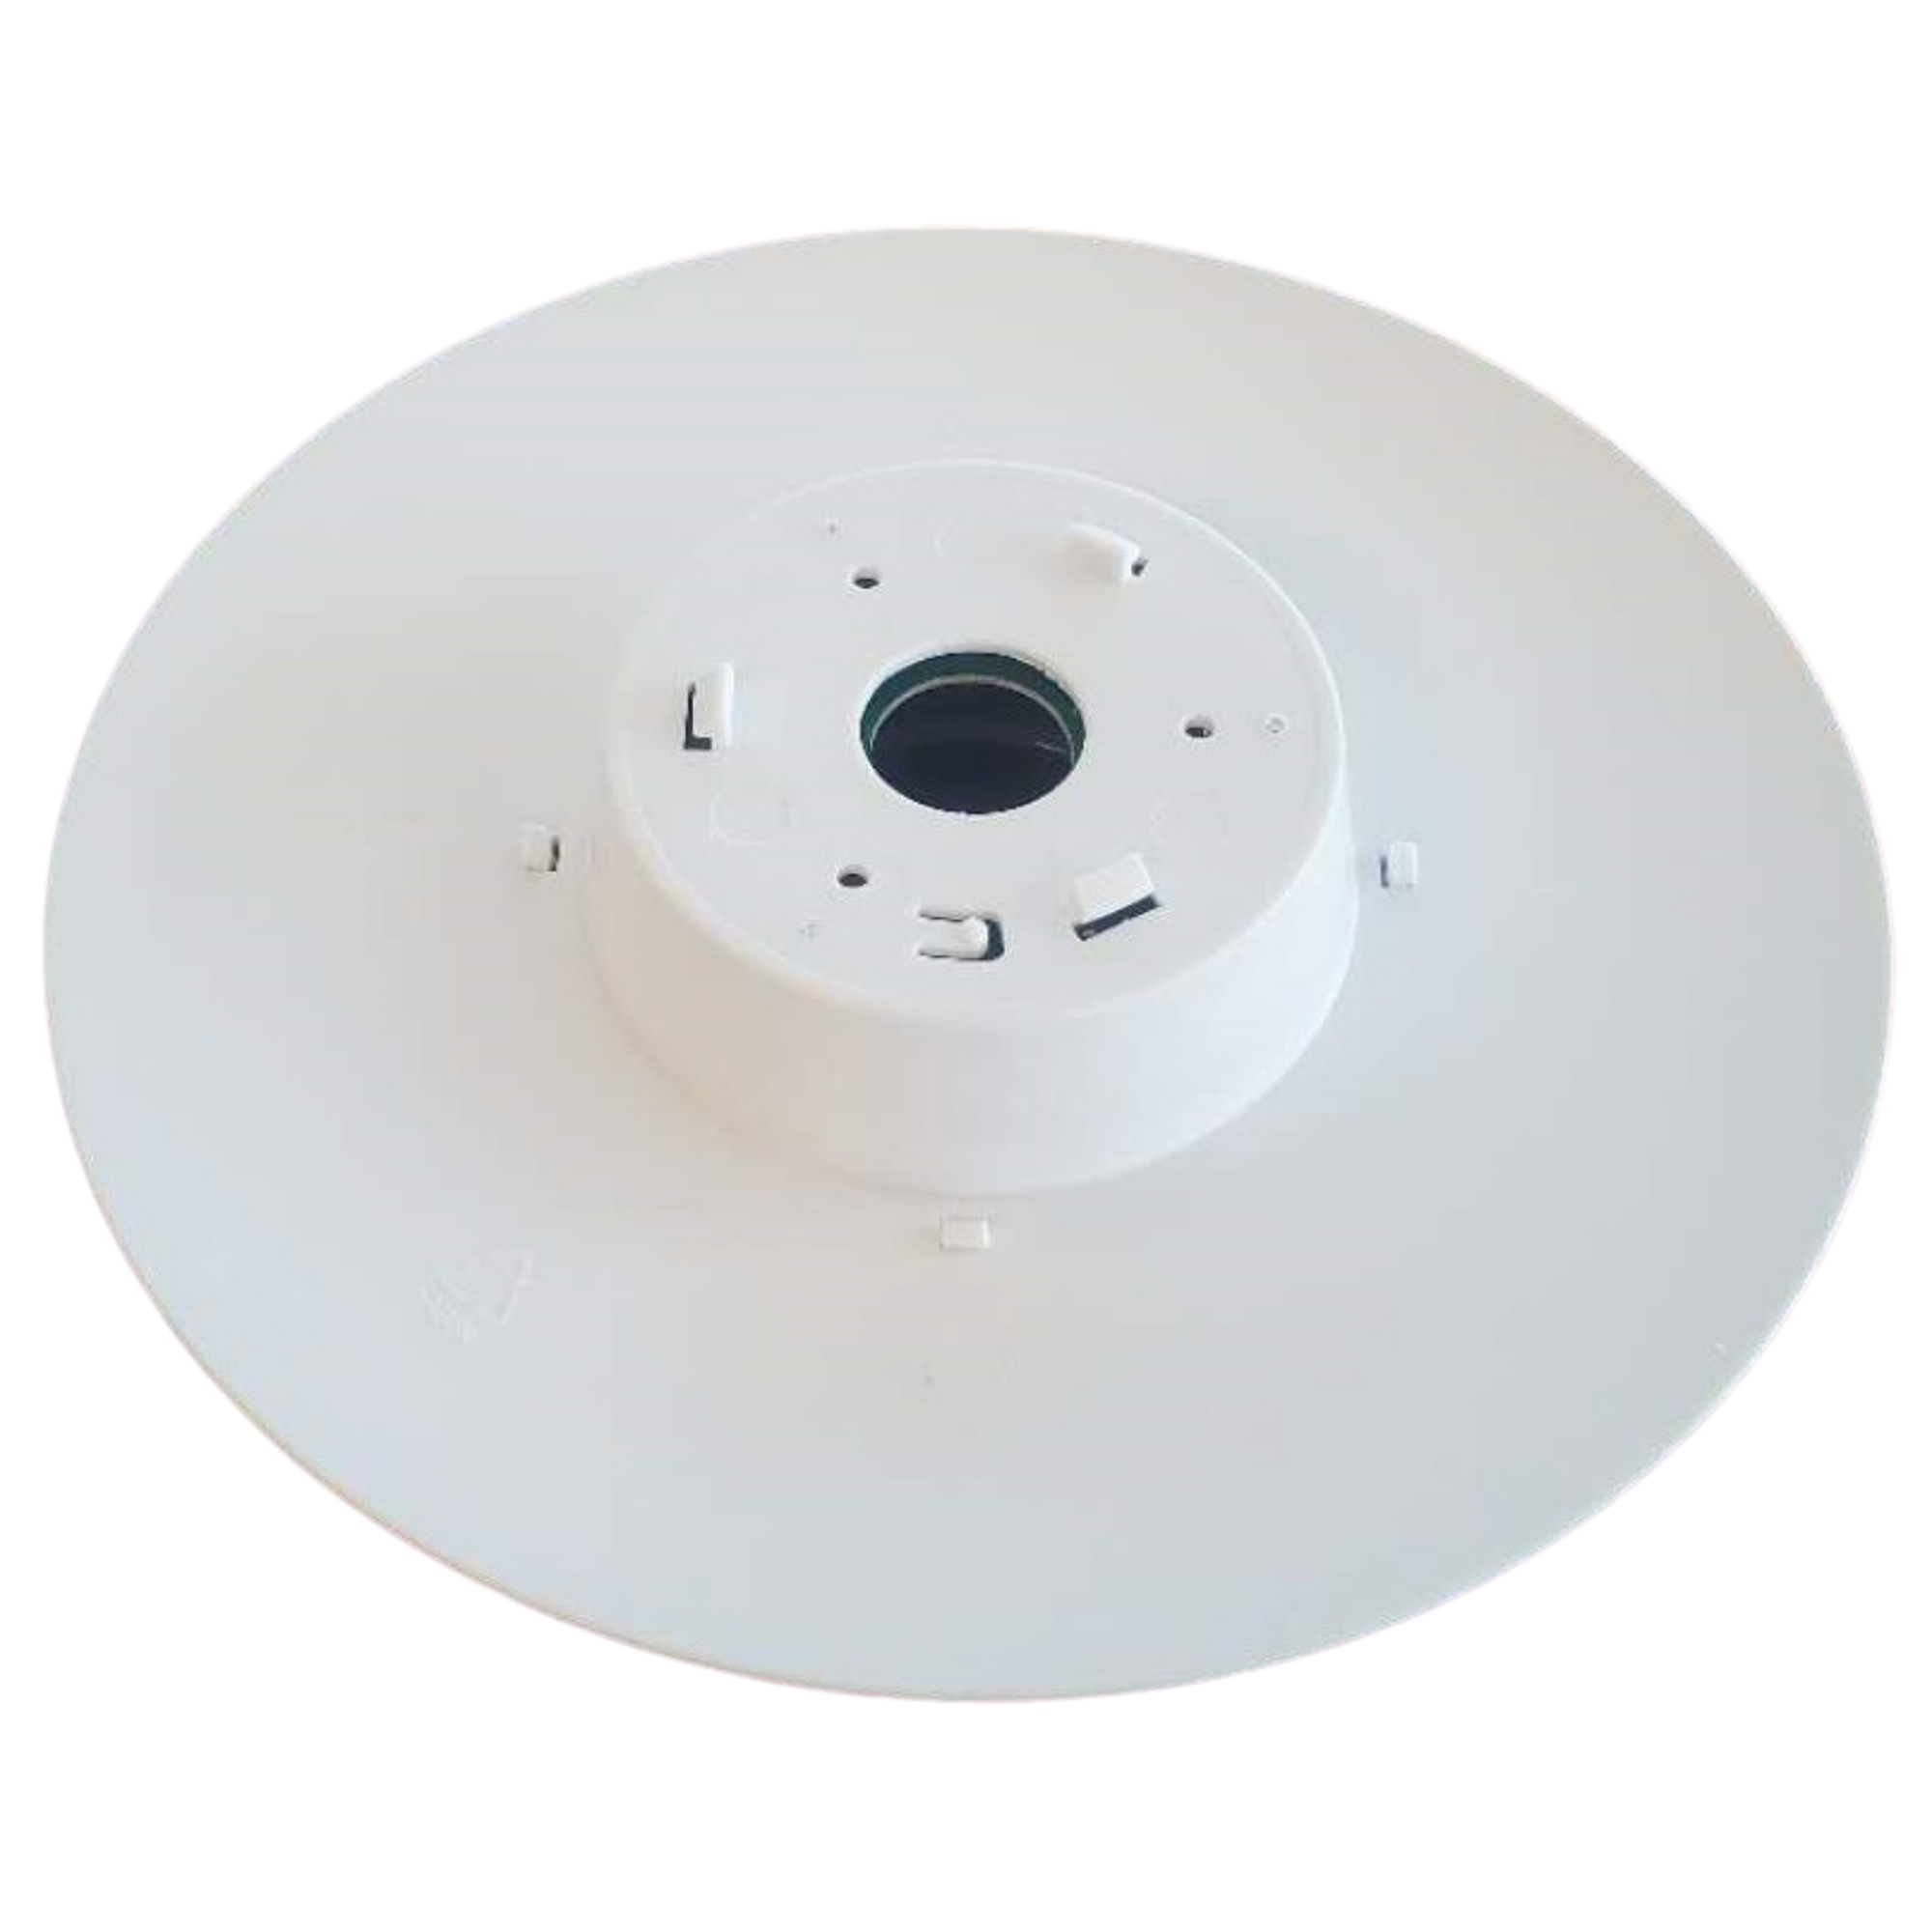 OEM Replacement Cover For Carro Smart Ceiling Fans-Icebreaker 56" & 60"